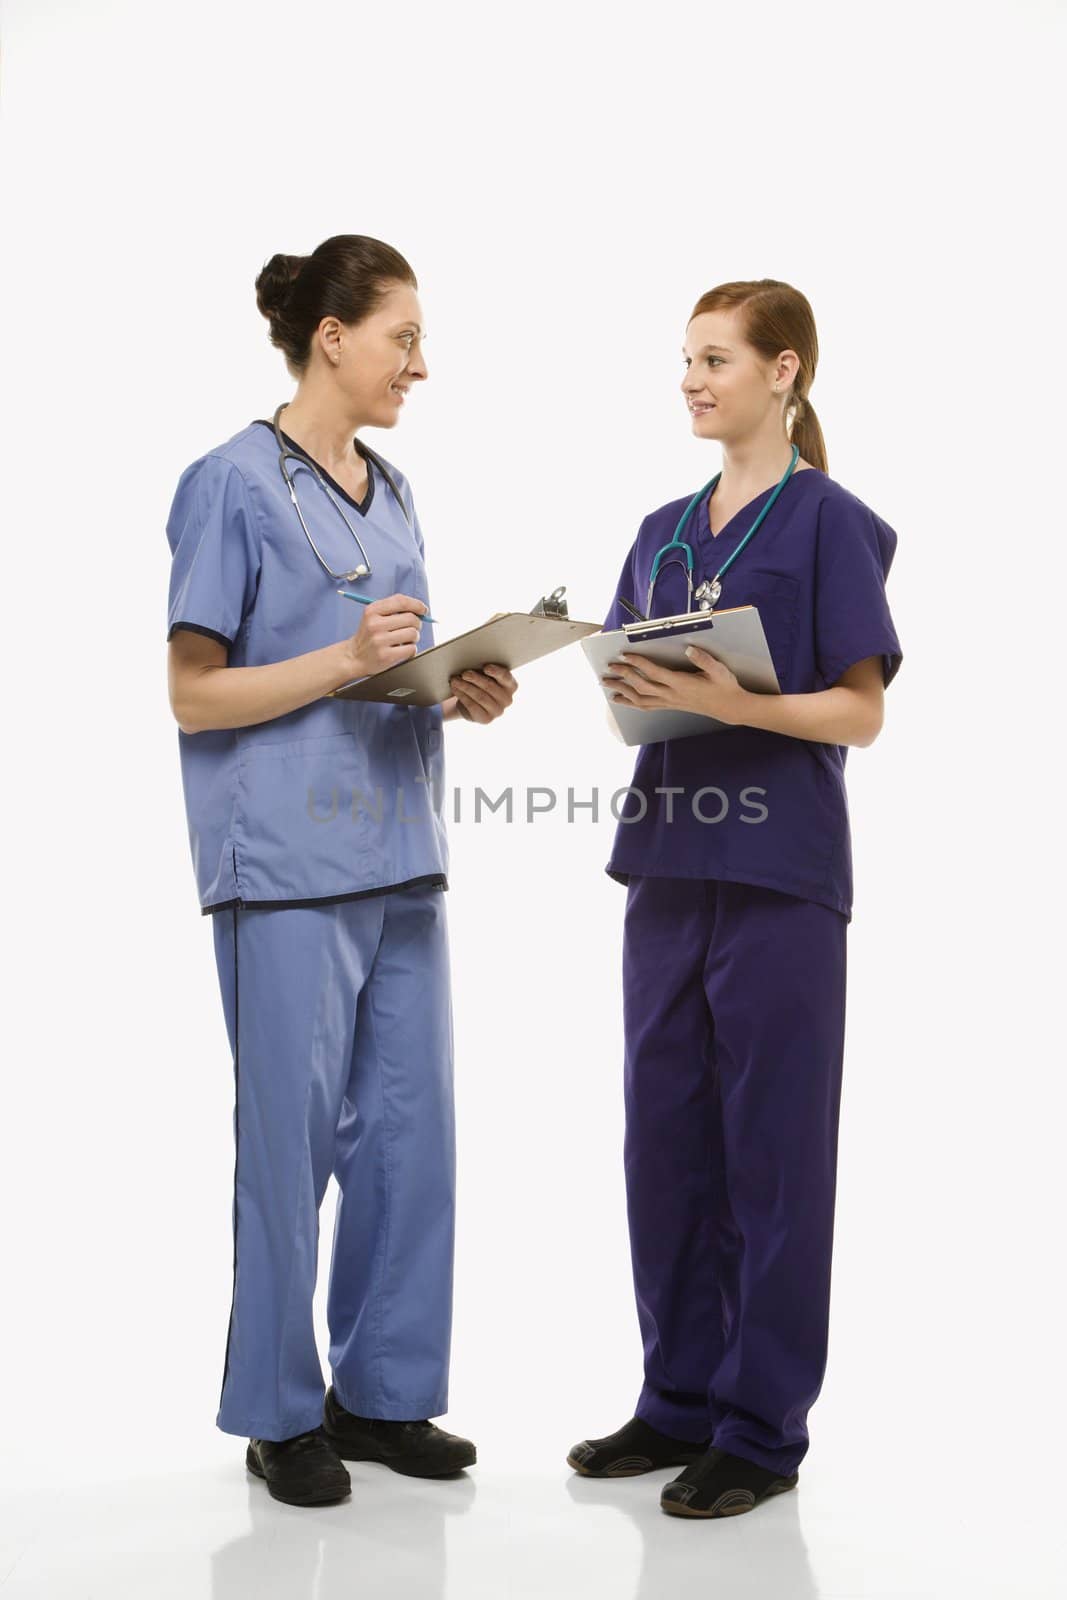 Portrait of Caucasian women doctors in medical scrubs standing talking holding medical charts against white background.